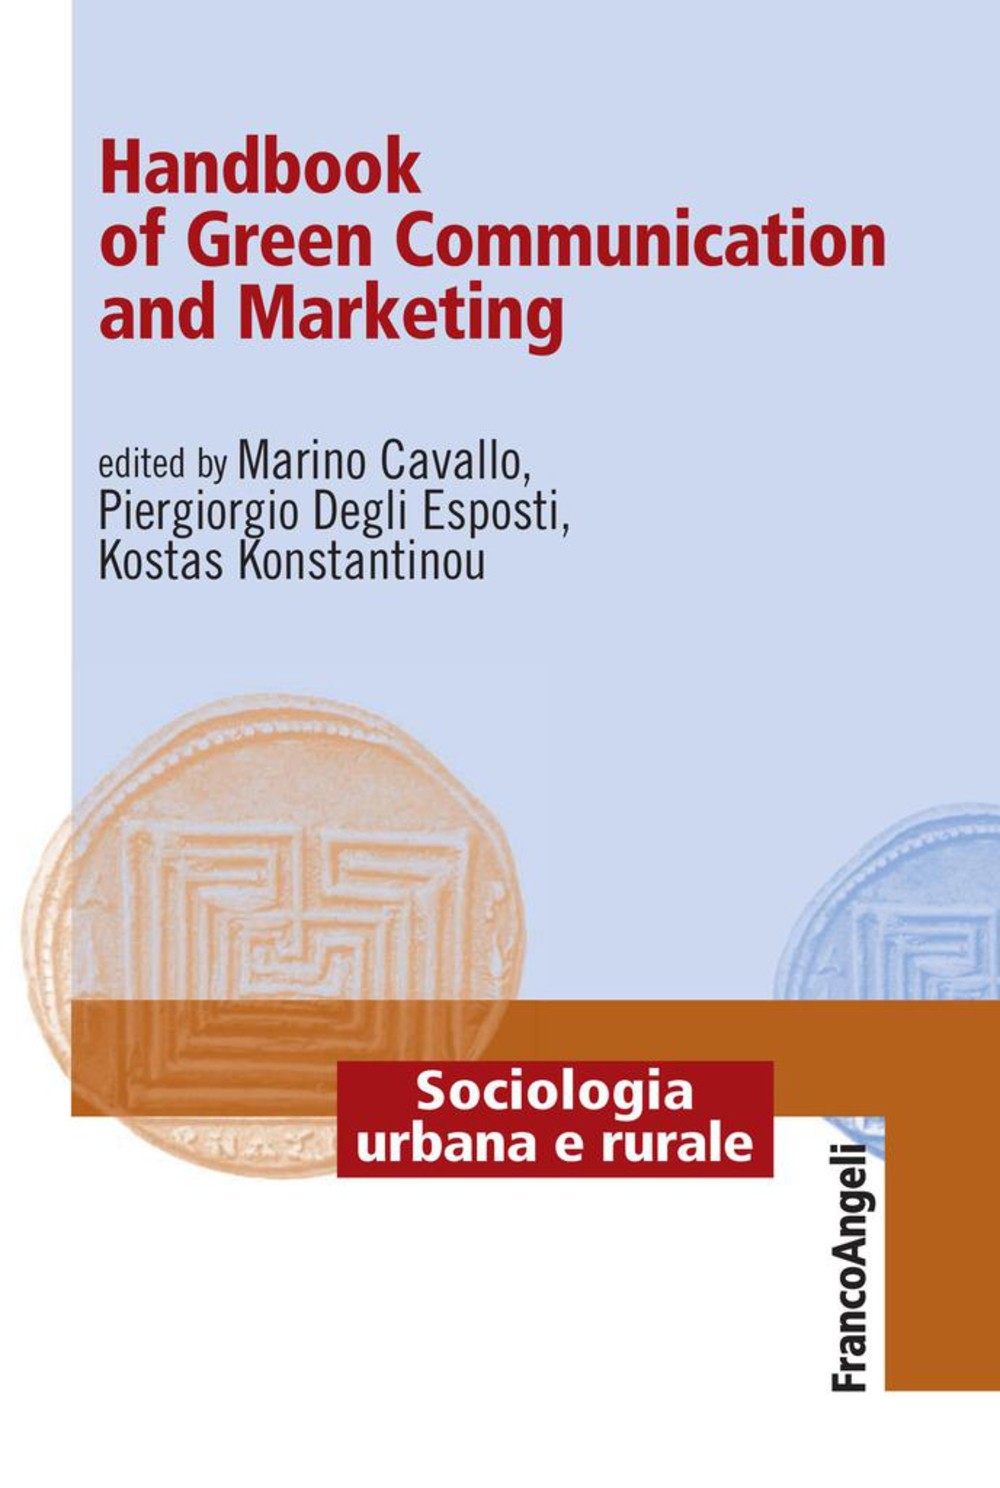 Handbook of green communication and marketing - Librerie.coop